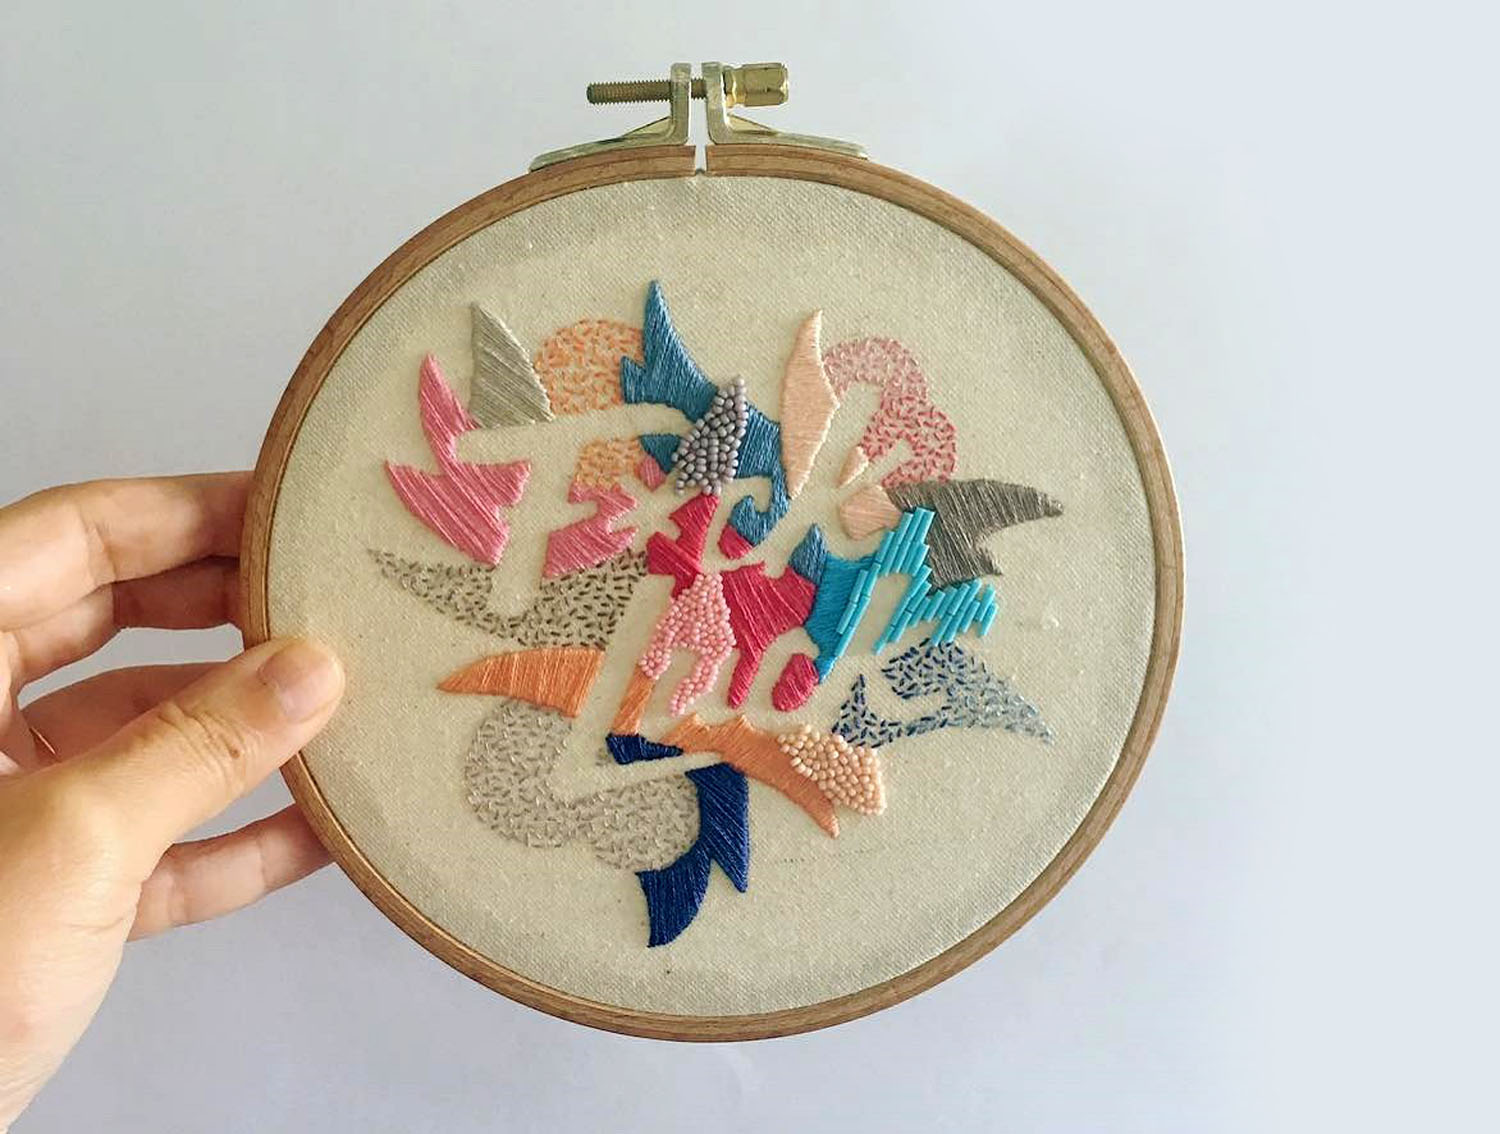 Embroidered typography by Valeria Molinari 